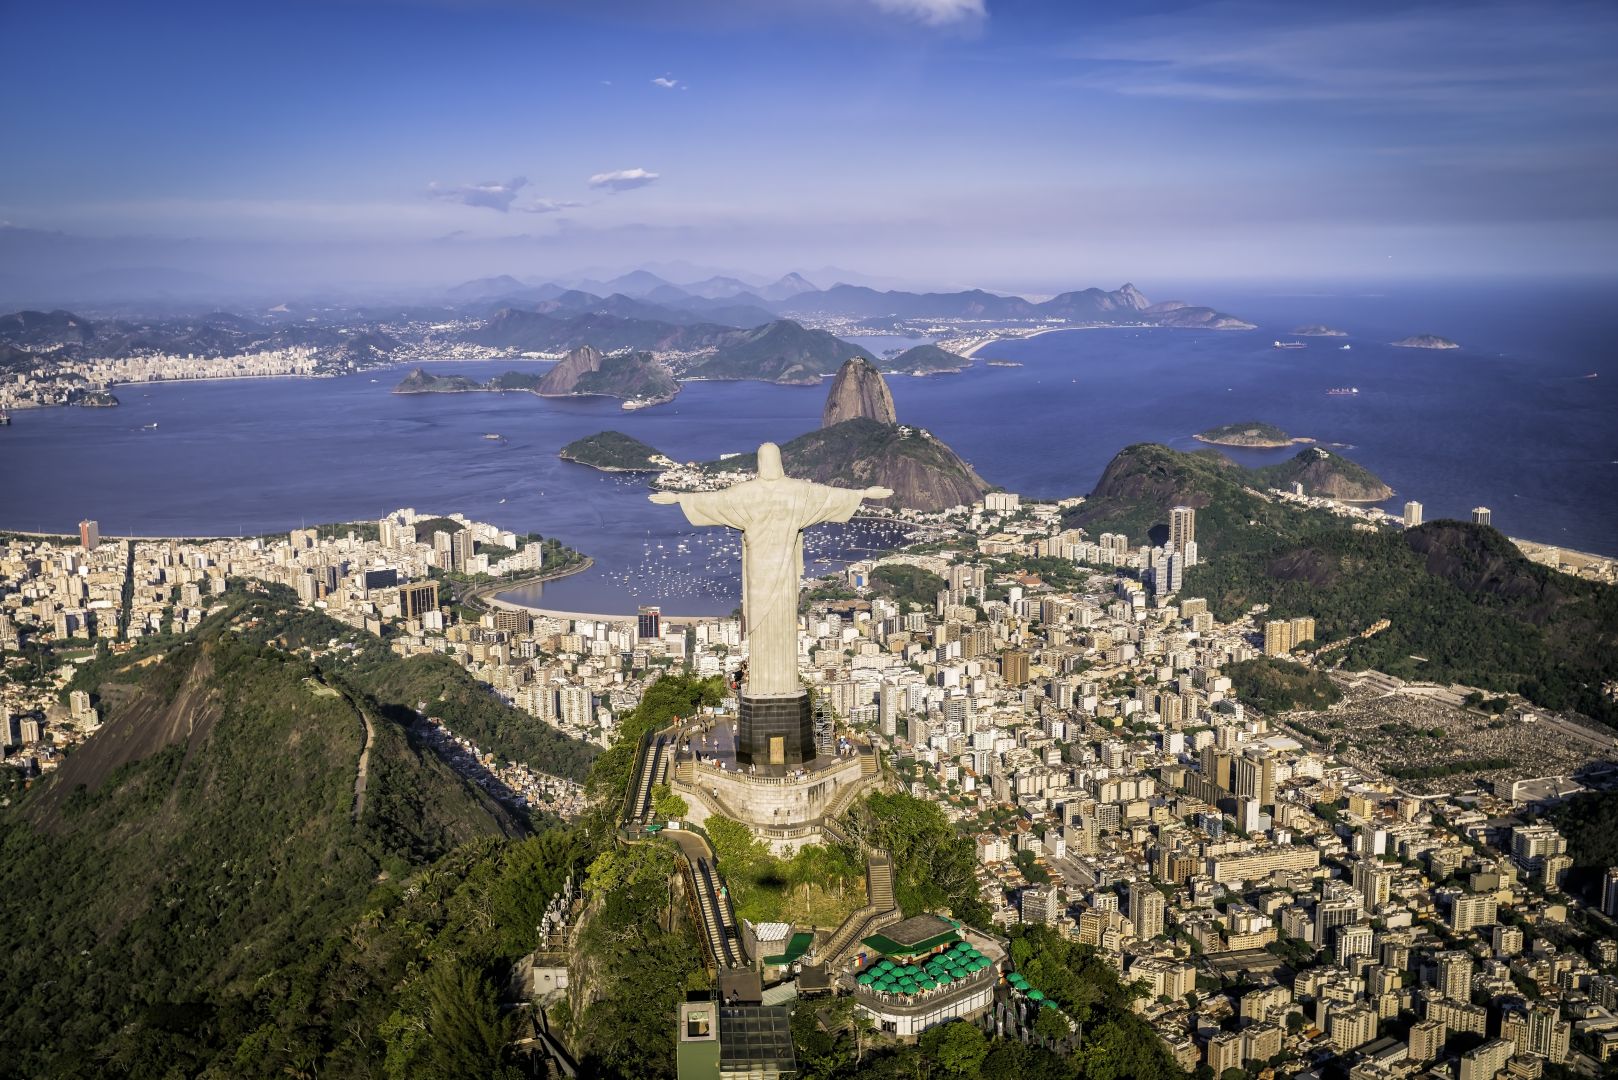 The Statue of Christ the Redeemer in Brazil, Rio 2016